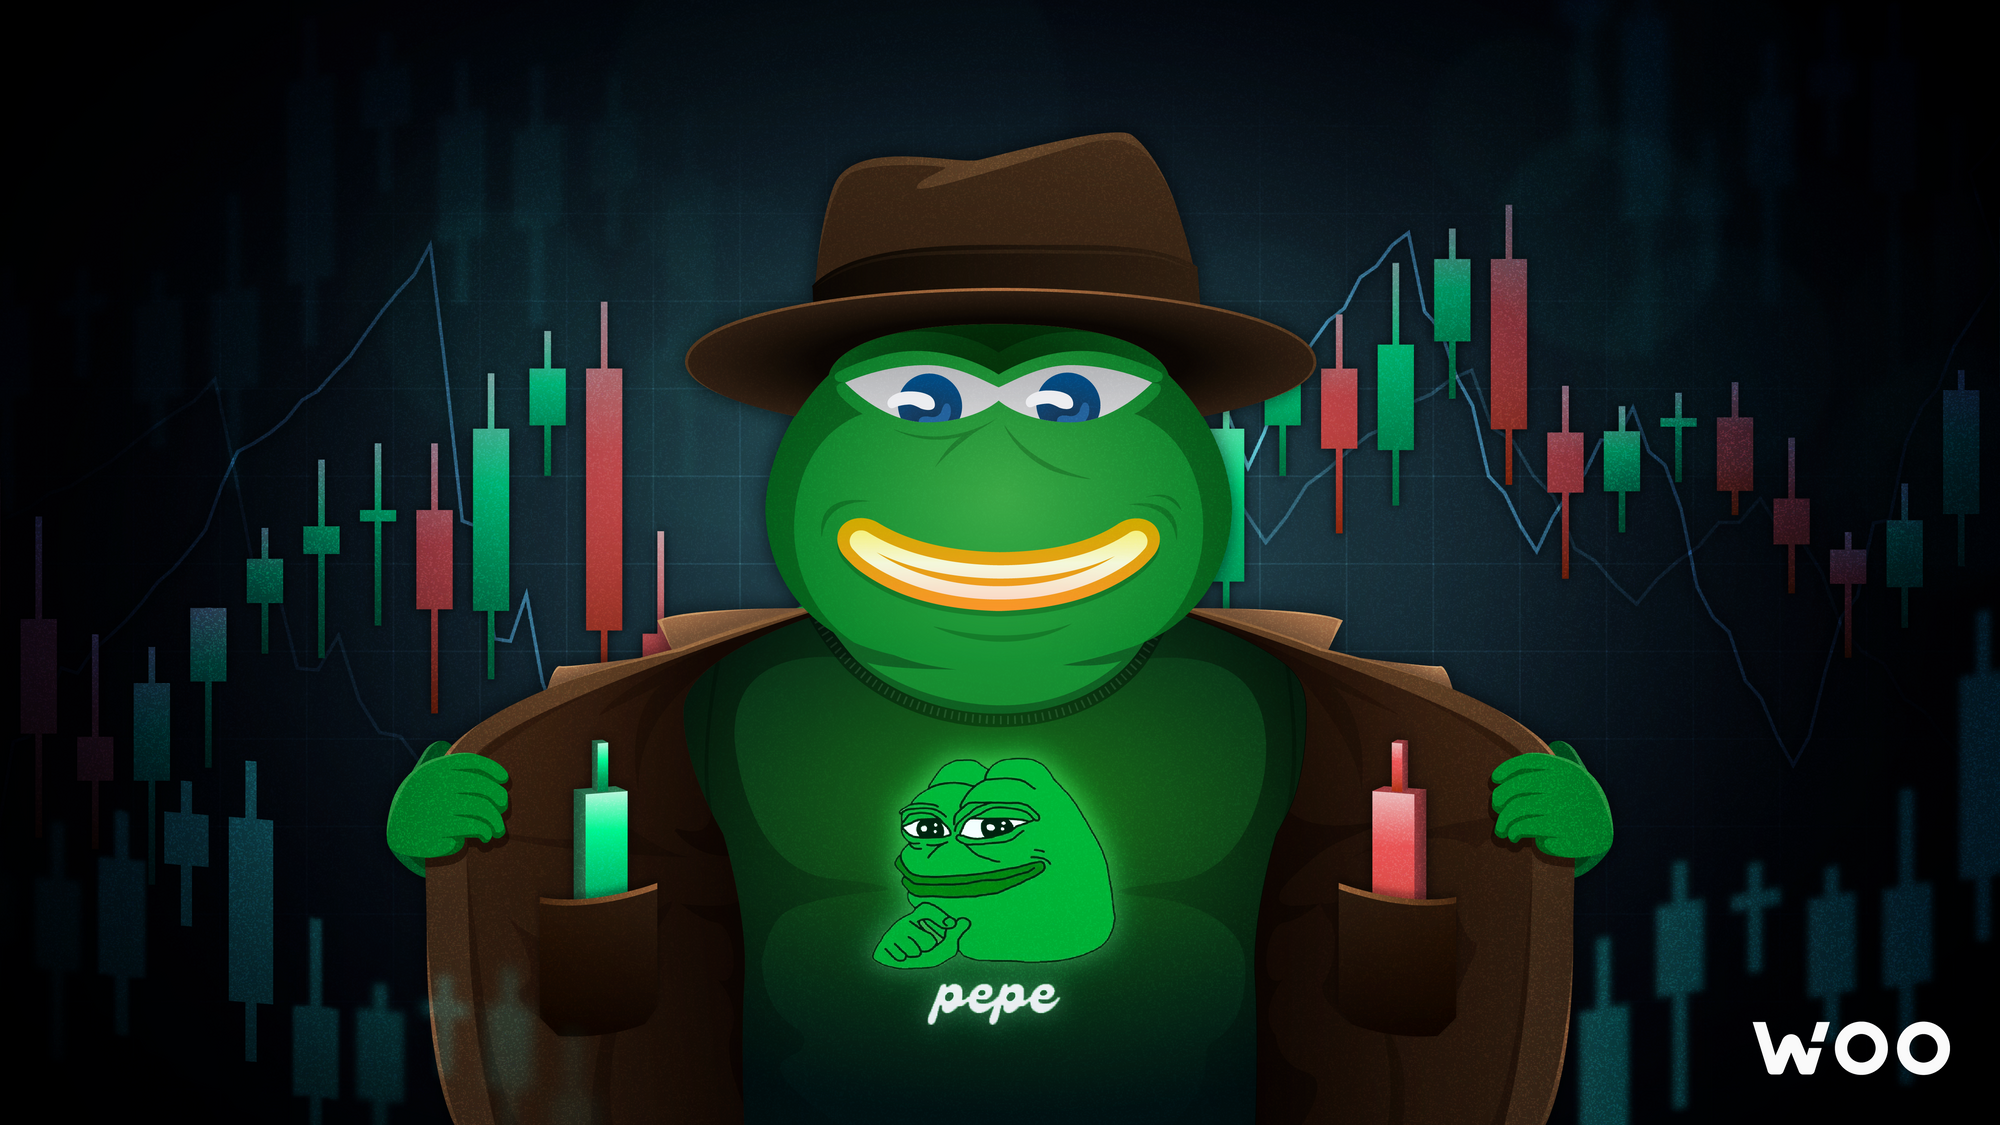 WOO X lists $PEPE for this peculiar reason